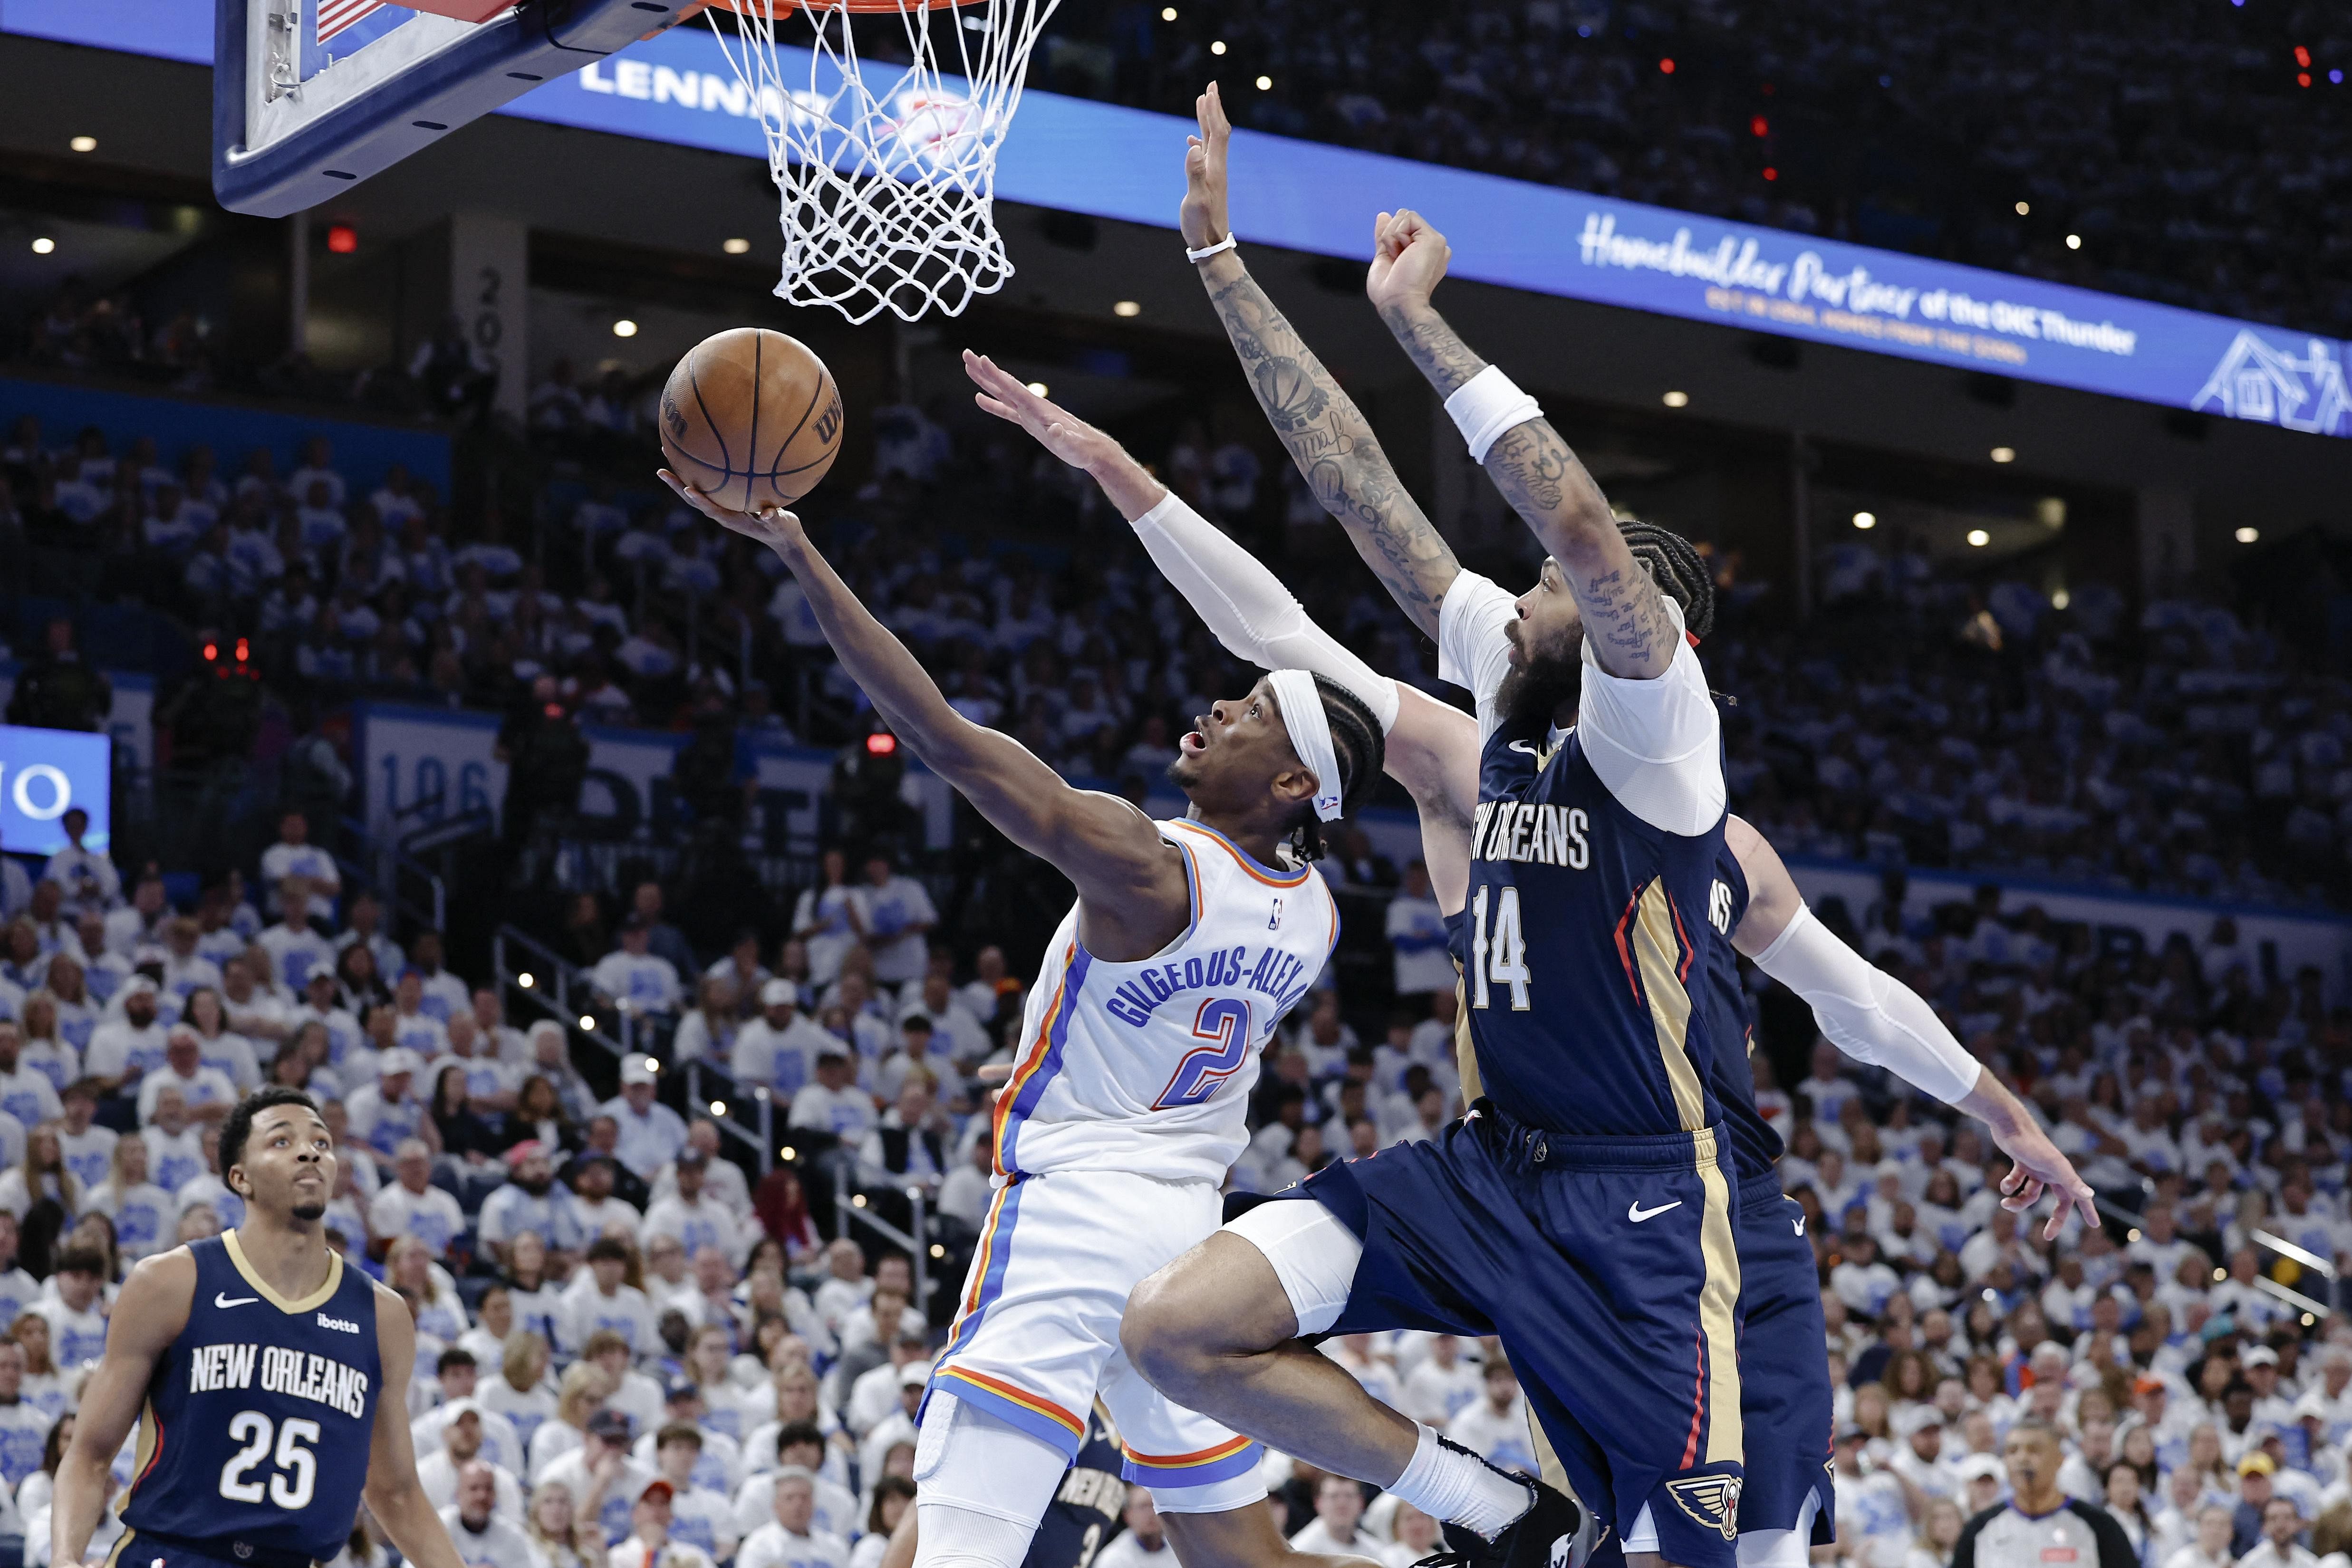 Oklahoma City Thunder edge New Orleans Pelicans in their NBA play-off opener